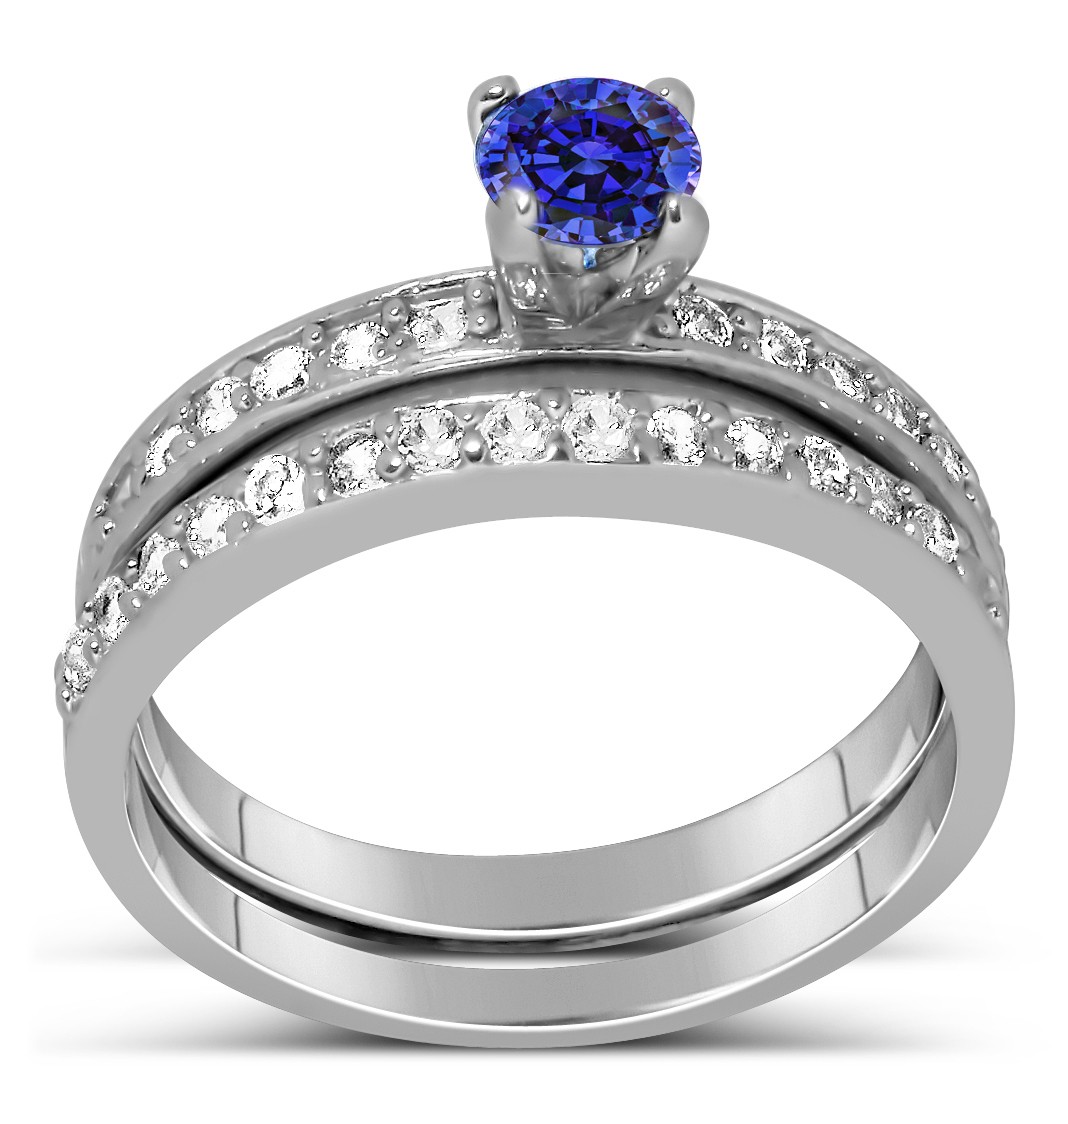 ... Round cut Blue Sapphire and Diamond Wedding Ring Set in White Gold